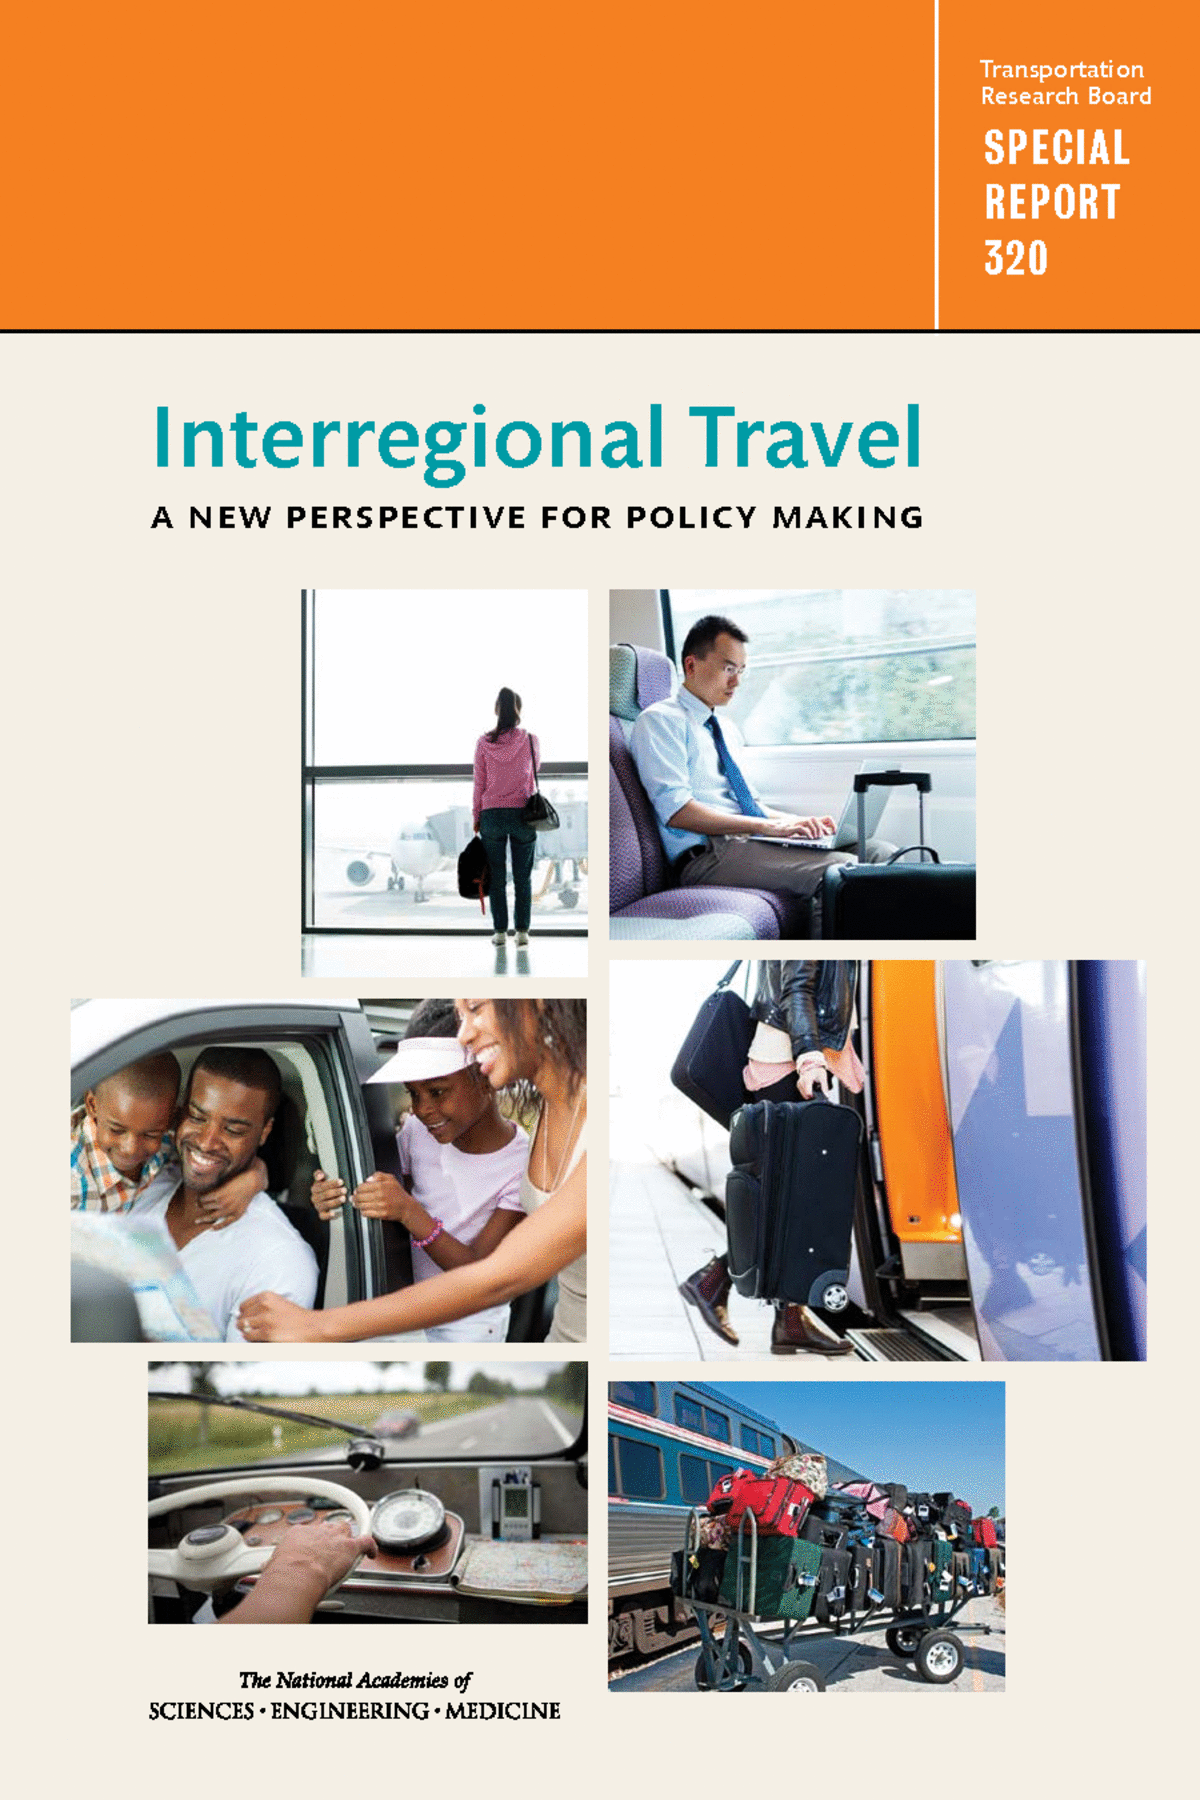 inter regional travel meaning